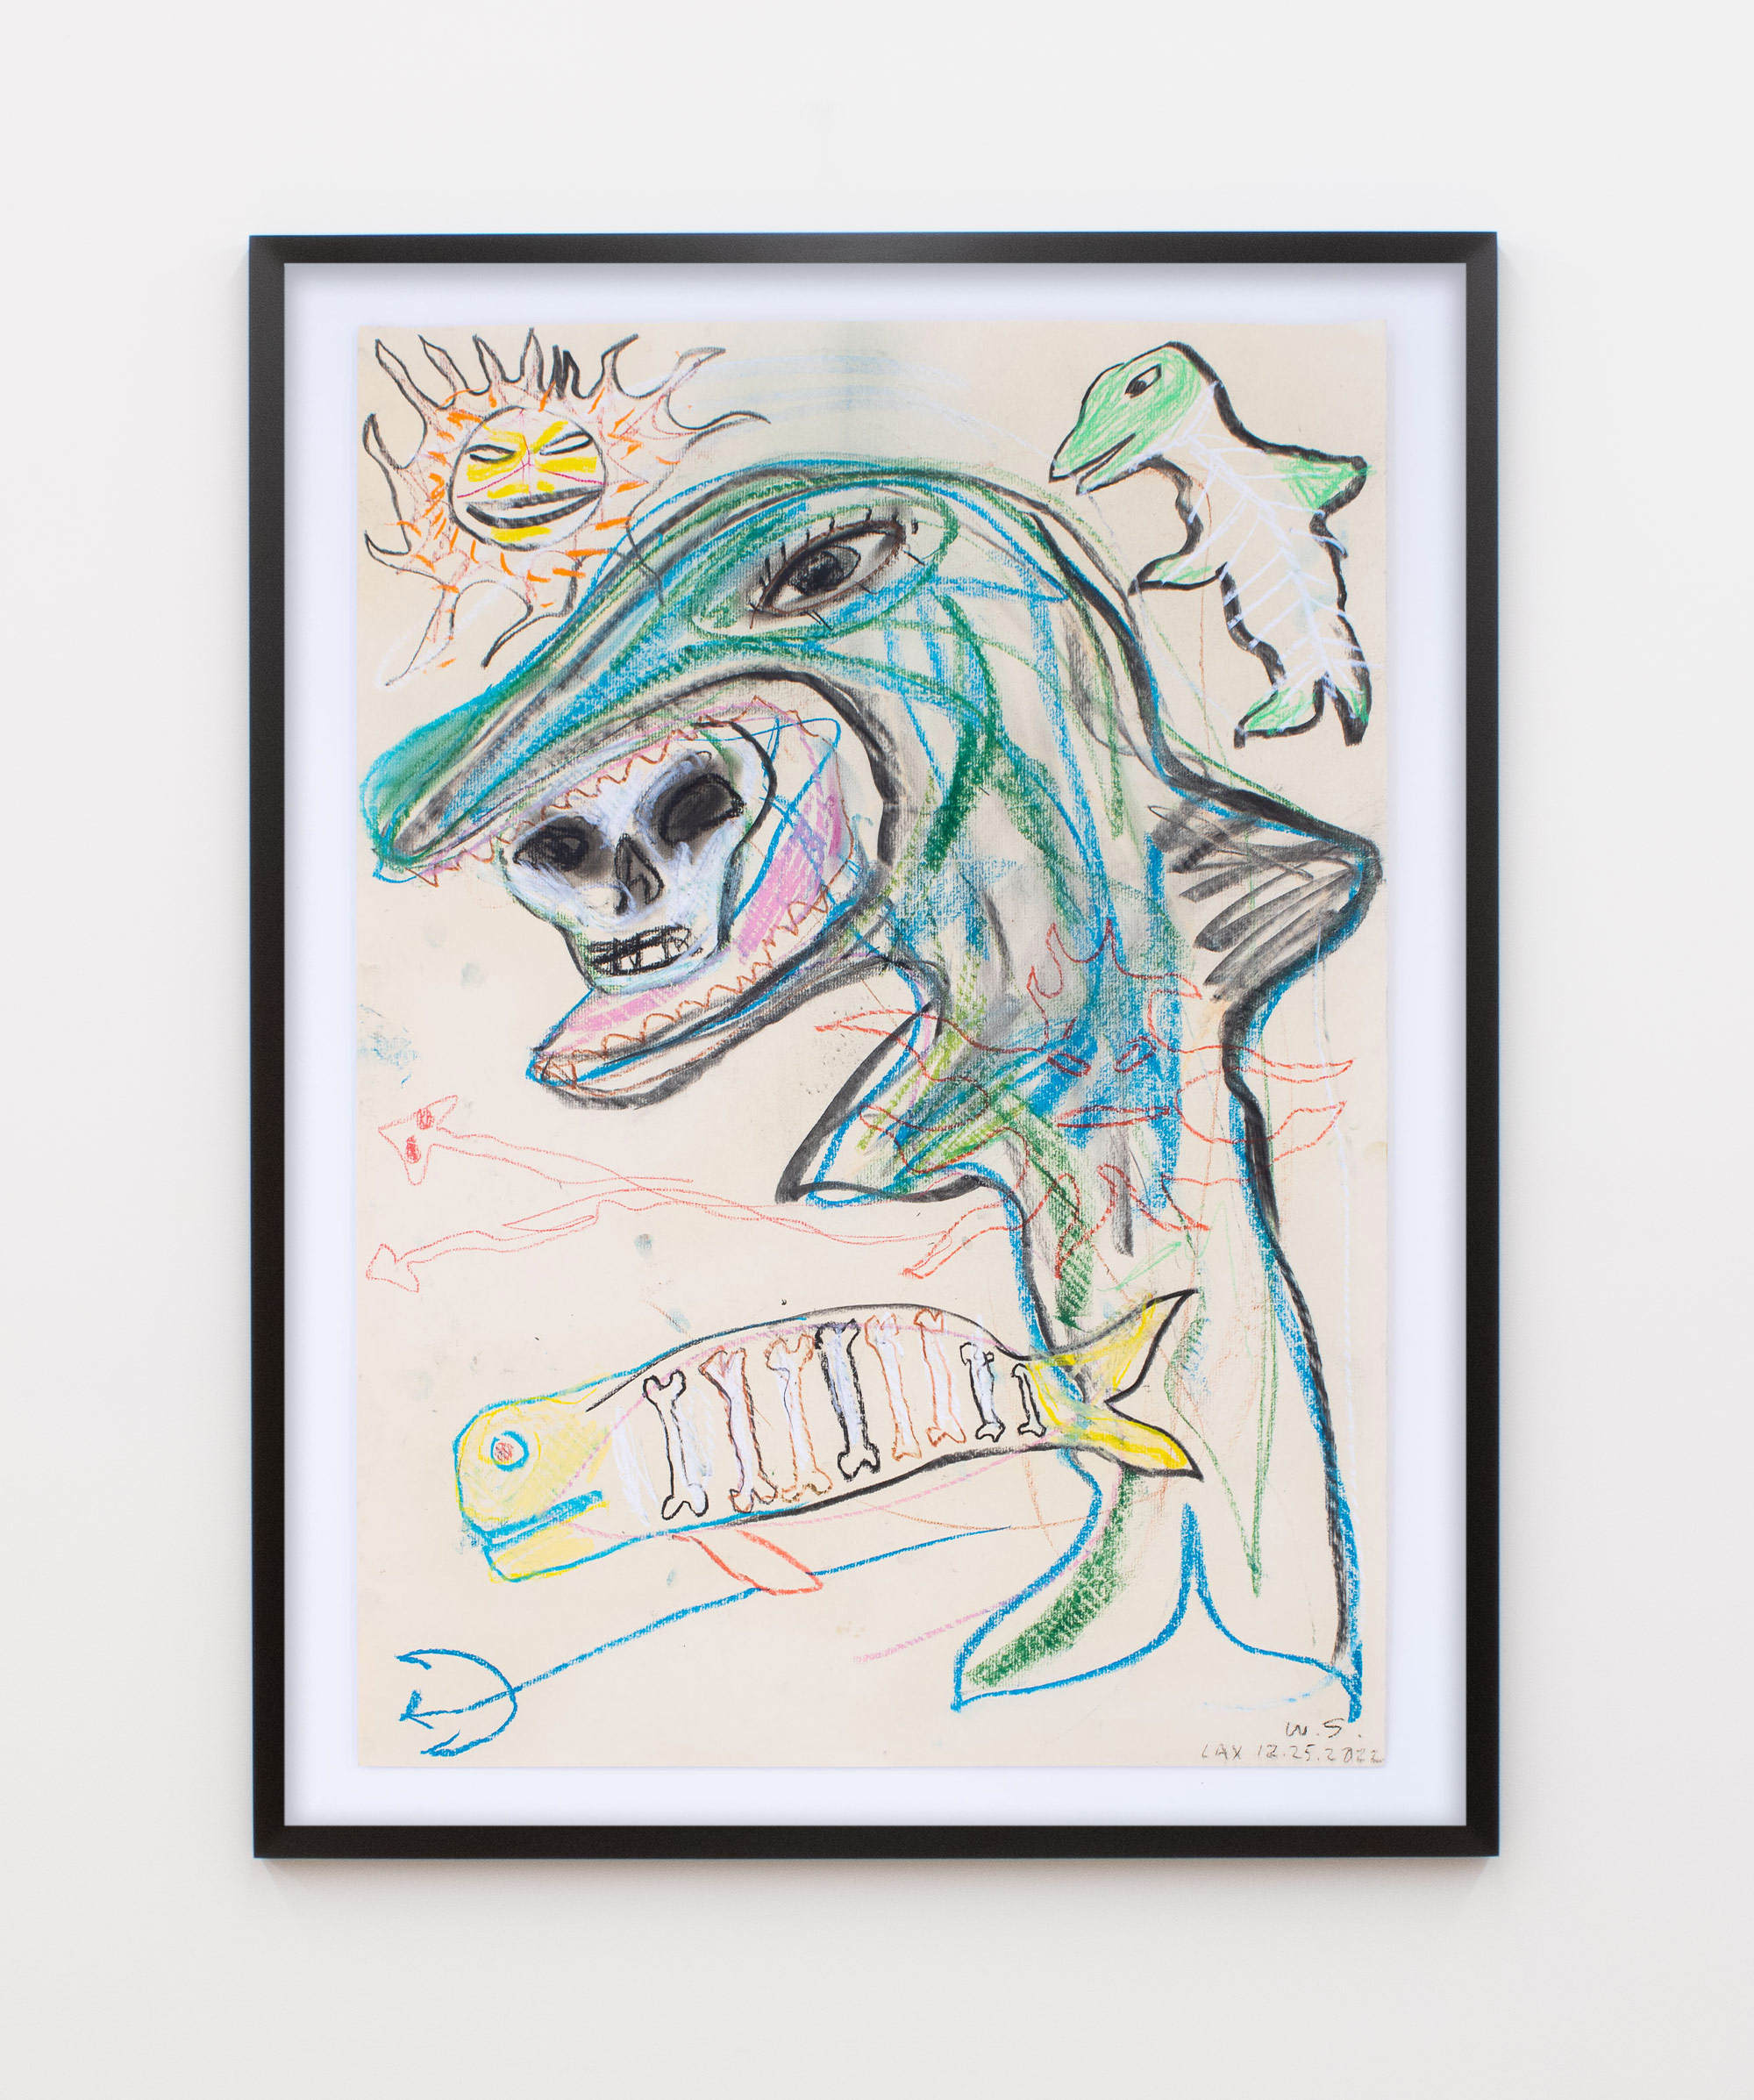 Bill Saylor, Untitled, 2022, Graphite, charcoal, and crayon on paper, 27 1/2 x 19 5/8 in.